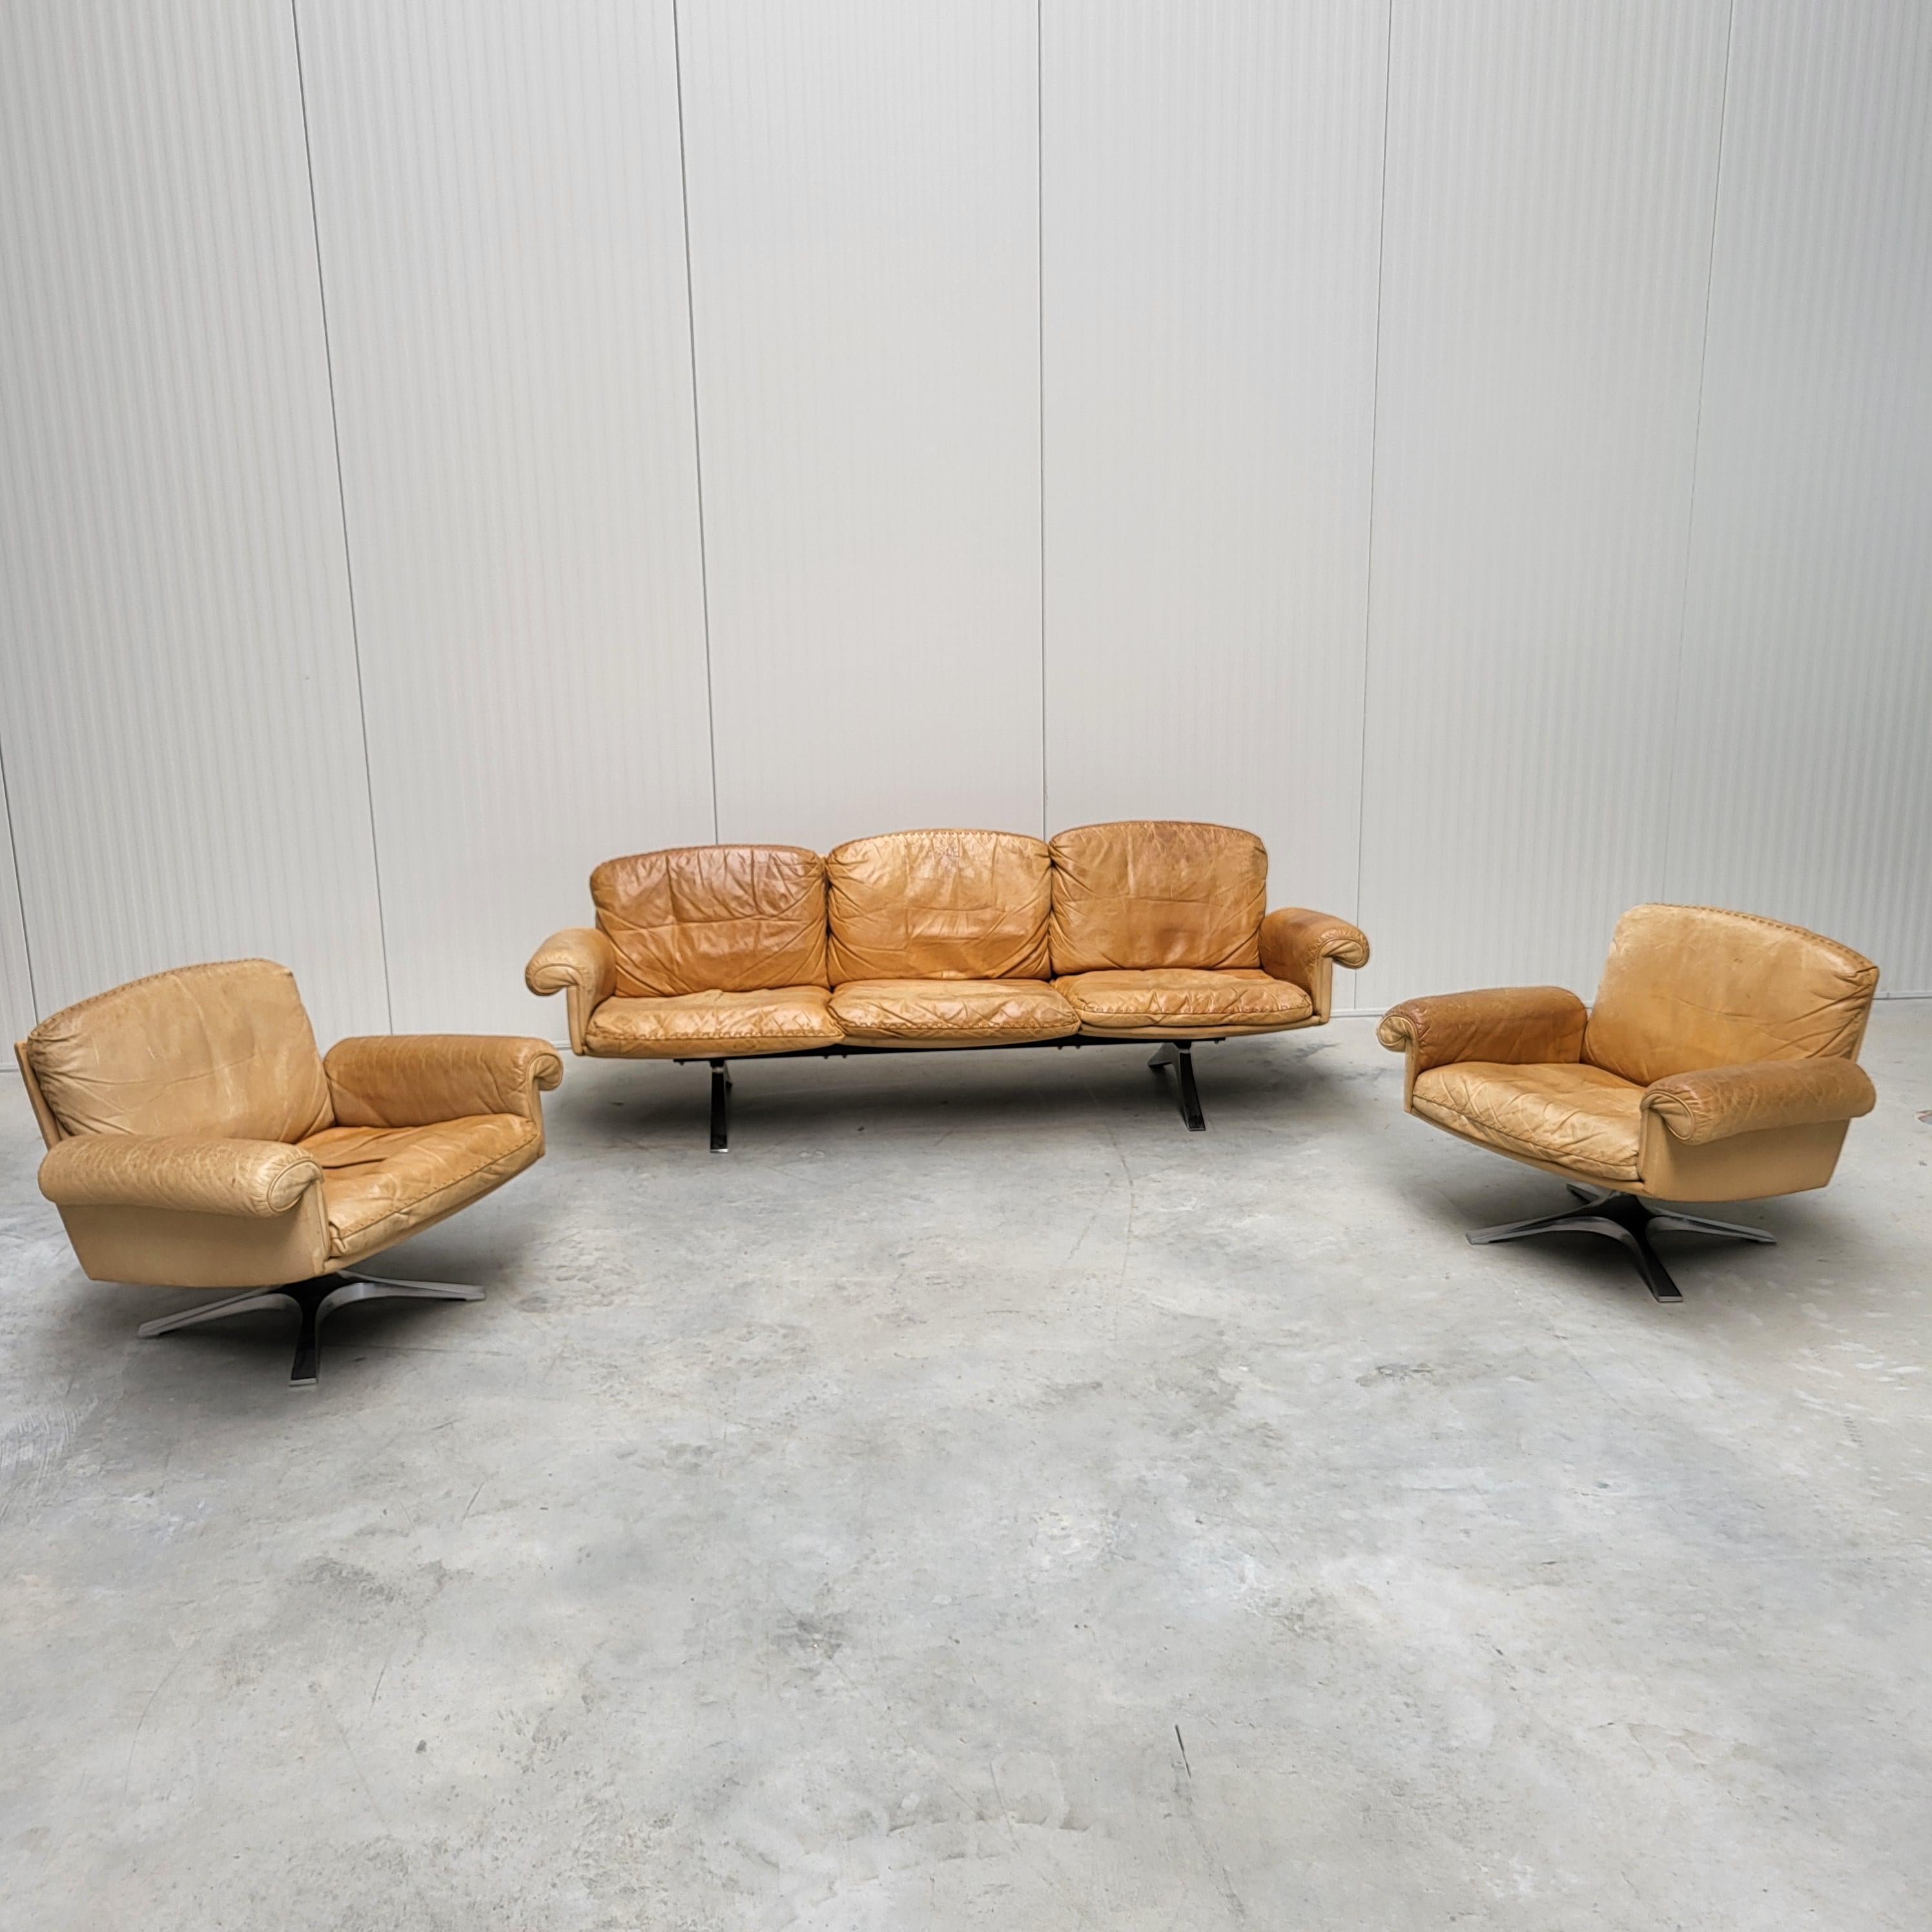 This amazing living room set with a 3-seater Sofa and 2x lounge chairs model DS31 were designed in the 1960s by the De Sede design team and produced by De Sede in Switzerland in the 1970s. 

The living room set features an amazing patinated cognac